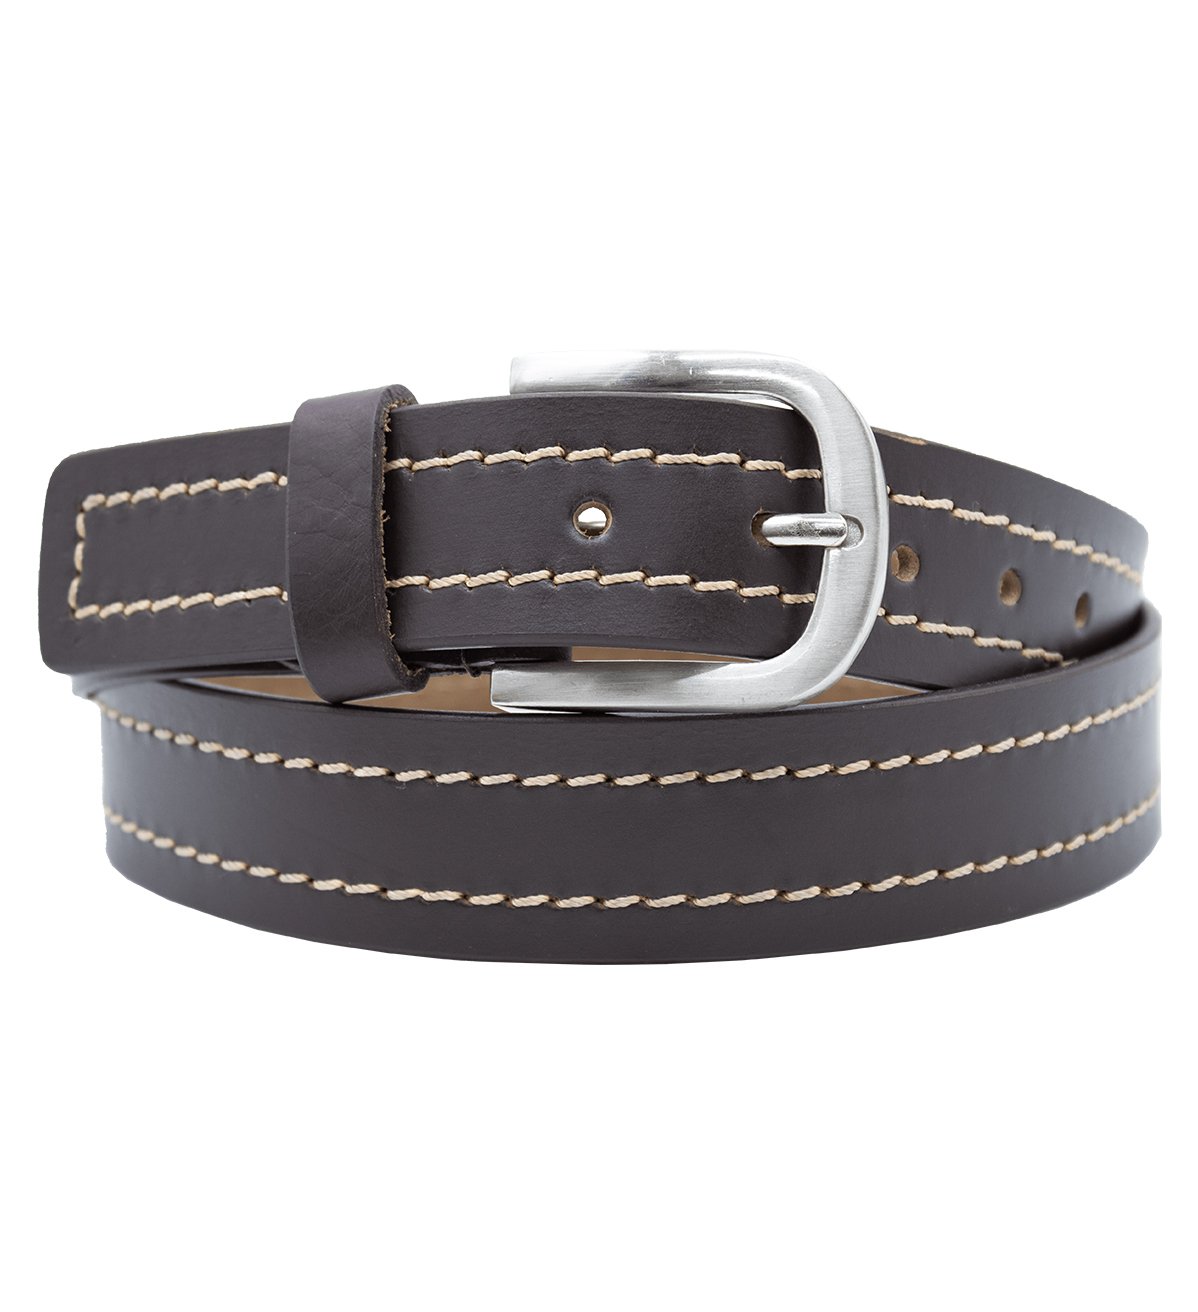 Men's Double Stitched Casual Leather Belt with Heavy Silver Buckle - #BT-1615